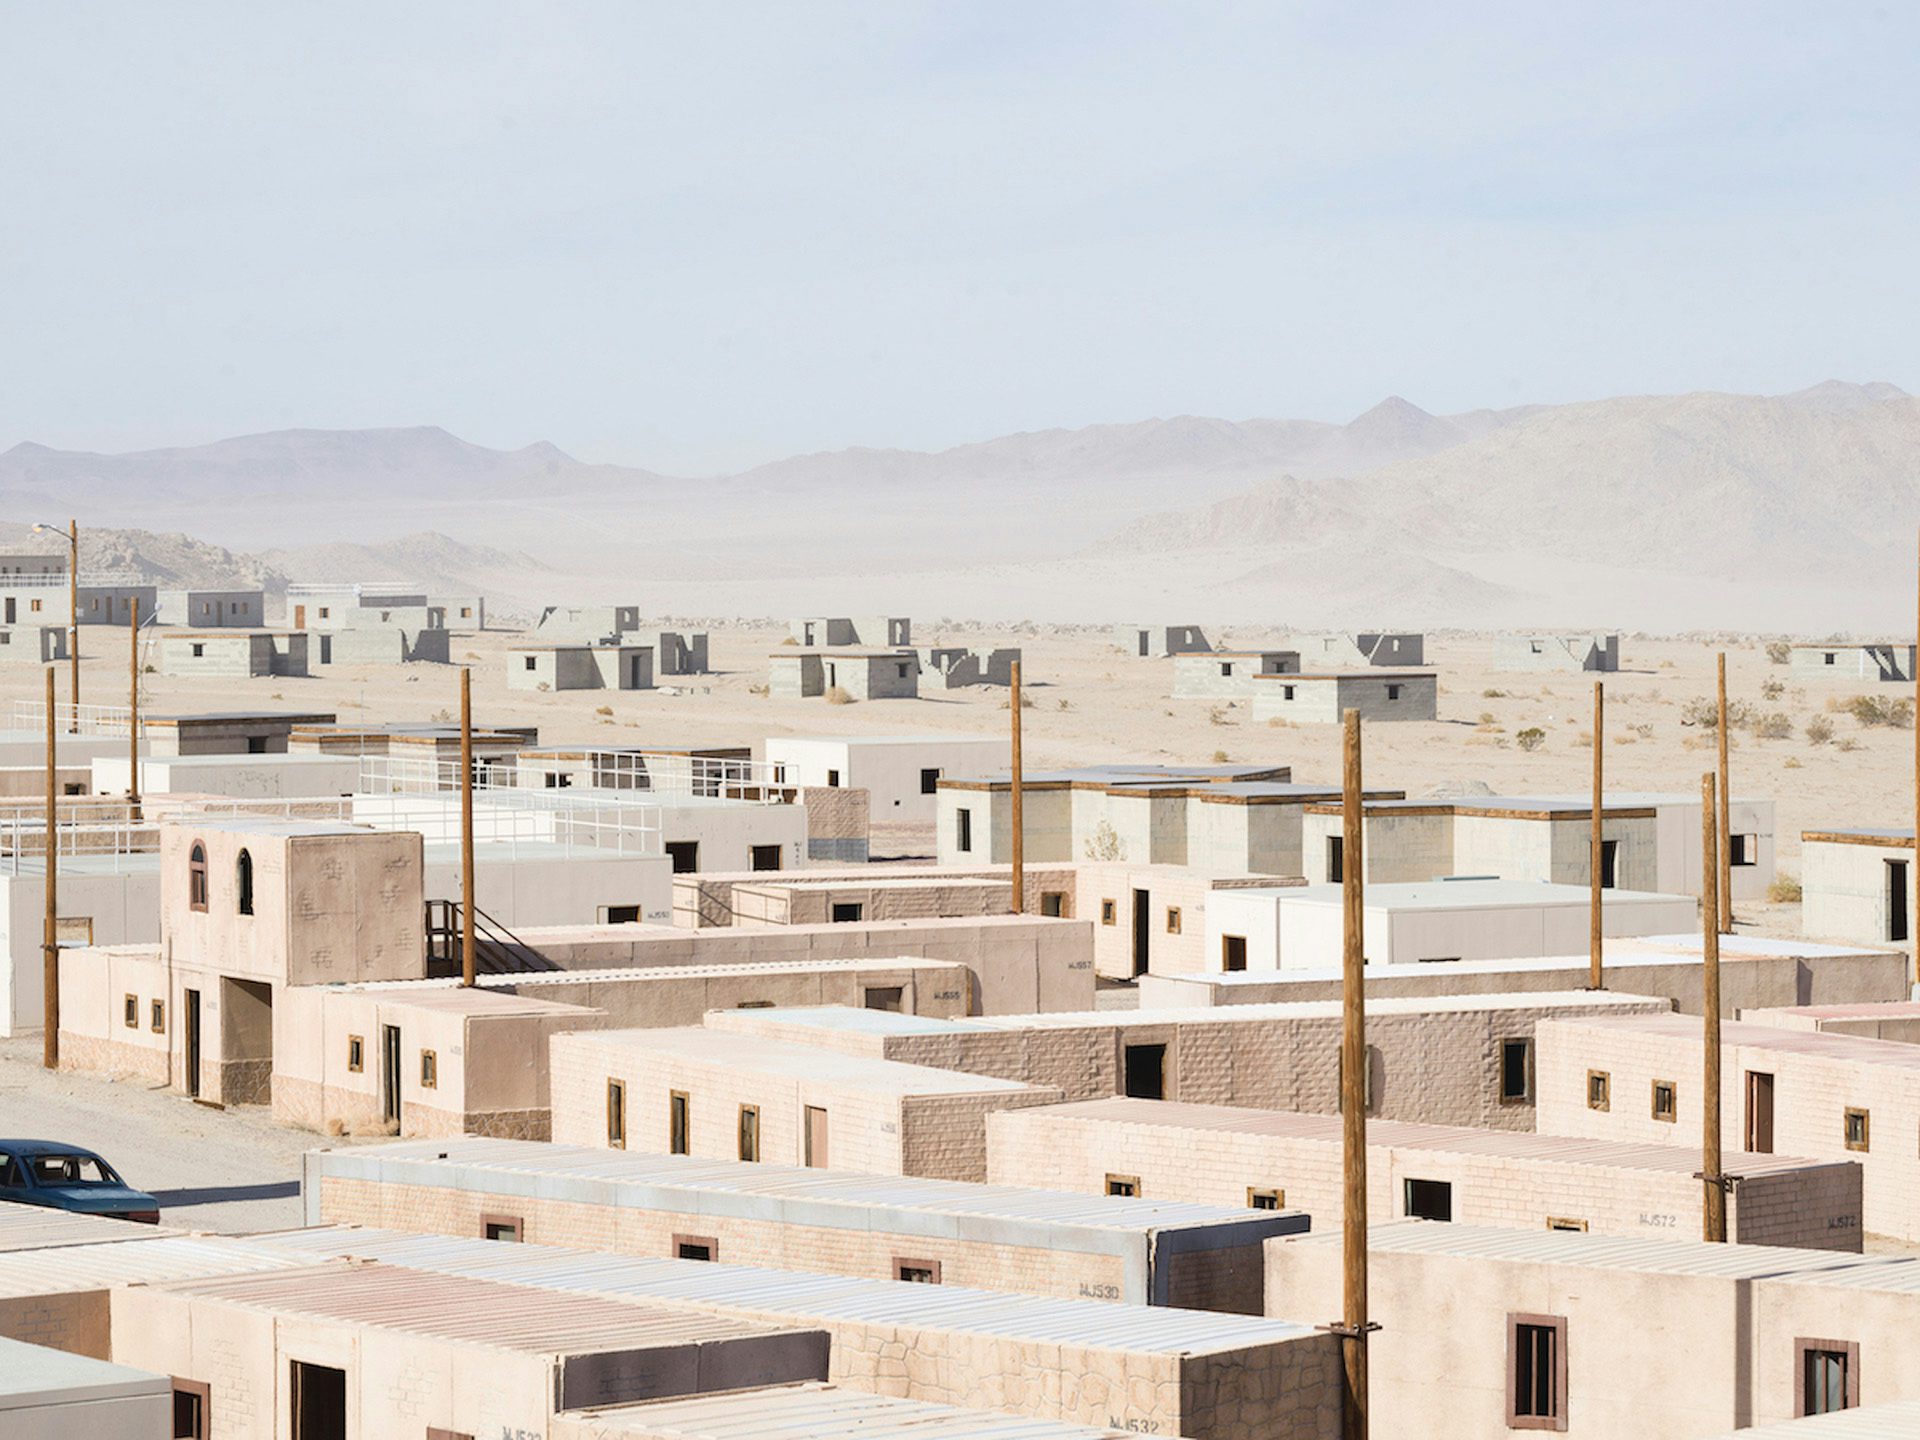 Image from American Glitch by Andrea Orejarena and Caleb Stein showing a replica Iraqi village surrounded by desert